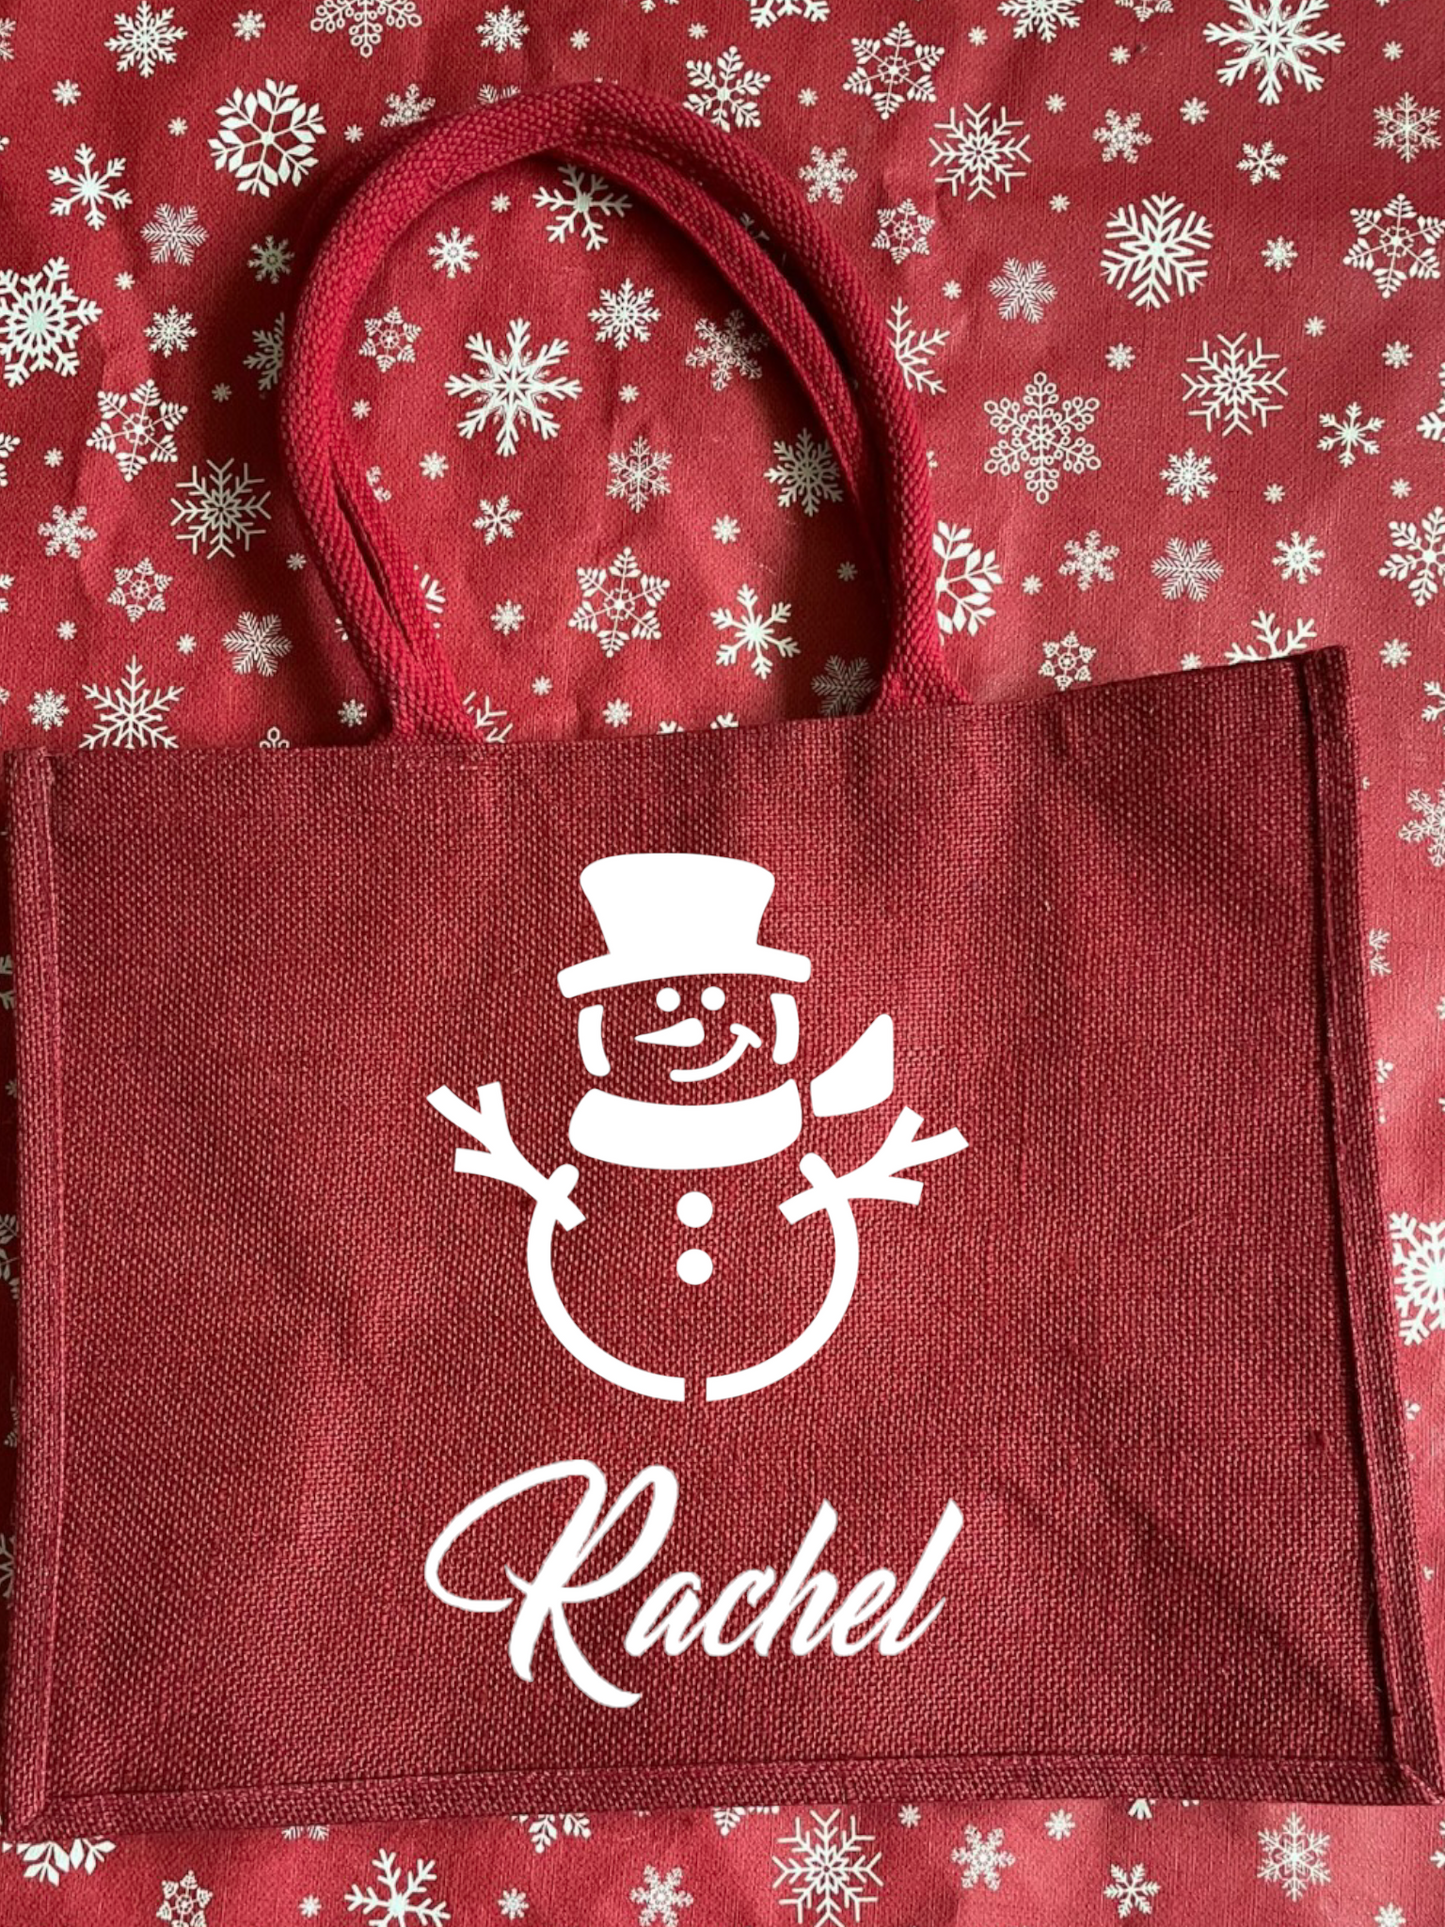 Large hessian / jute personalised Christmas tote bag. Gift or shopping bag, choice of designs.